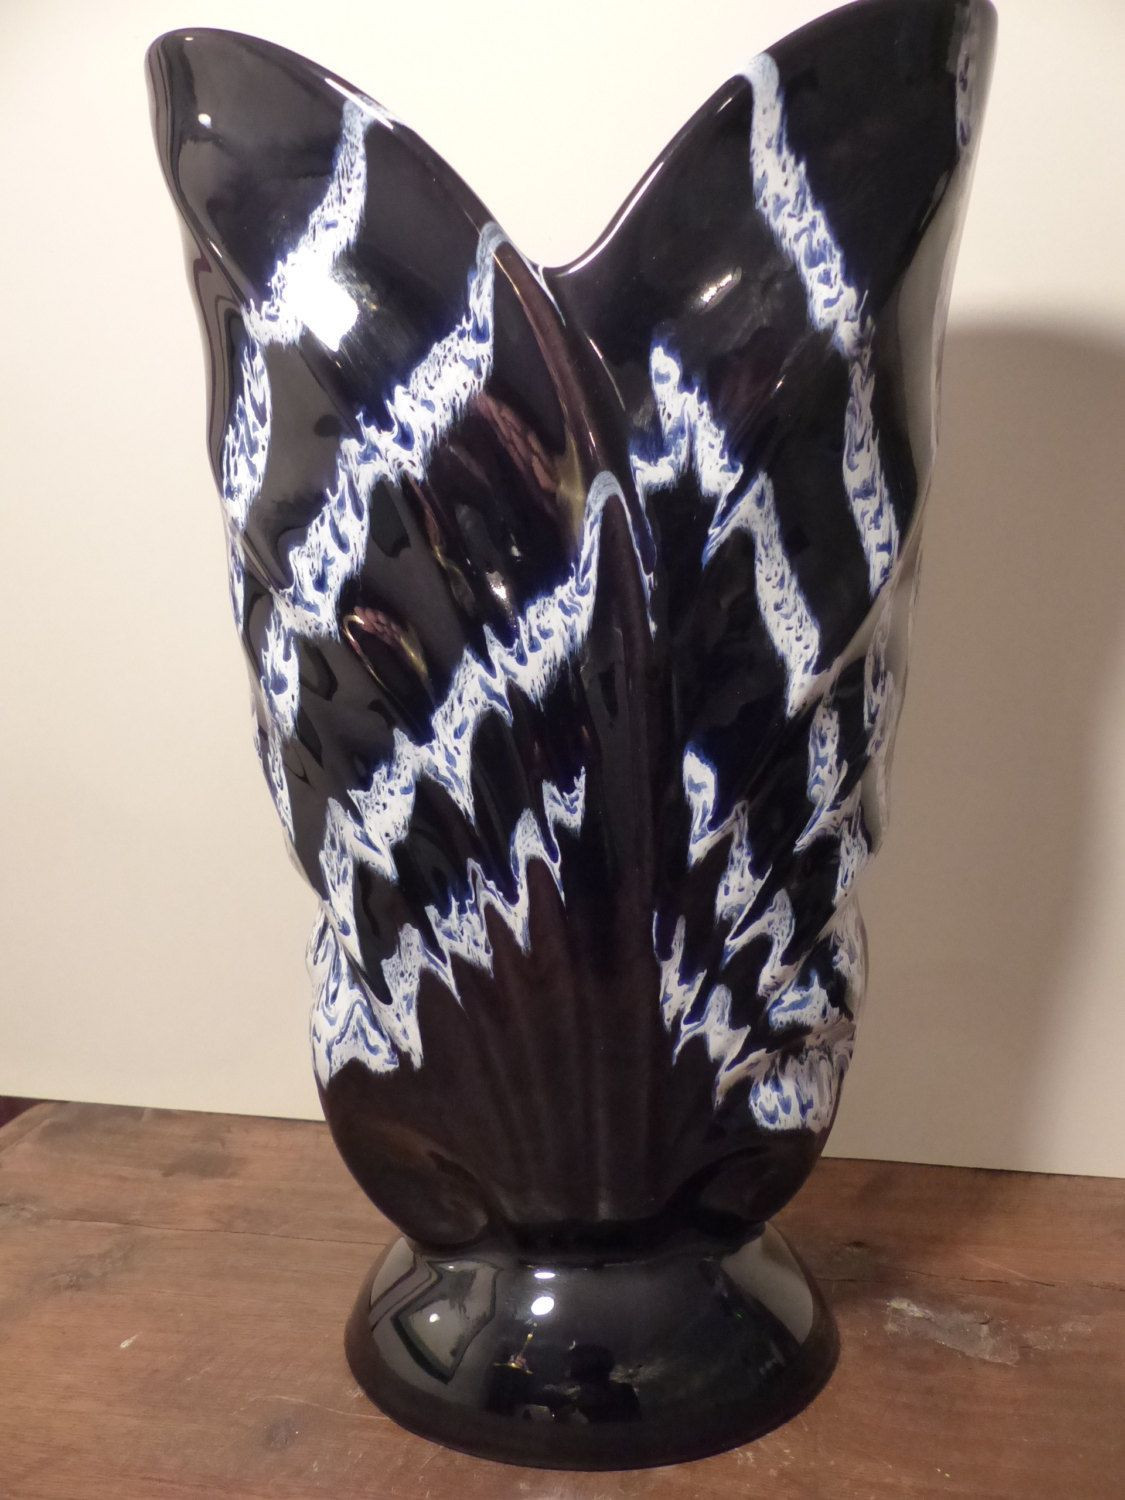 19 Perfect Personalised Grave Vase 2024 free download personalised grave vase of granite flower vases photos blue mountain pottery cobalt blue with blue mountain pottery cobalt blue granite tulip vase white